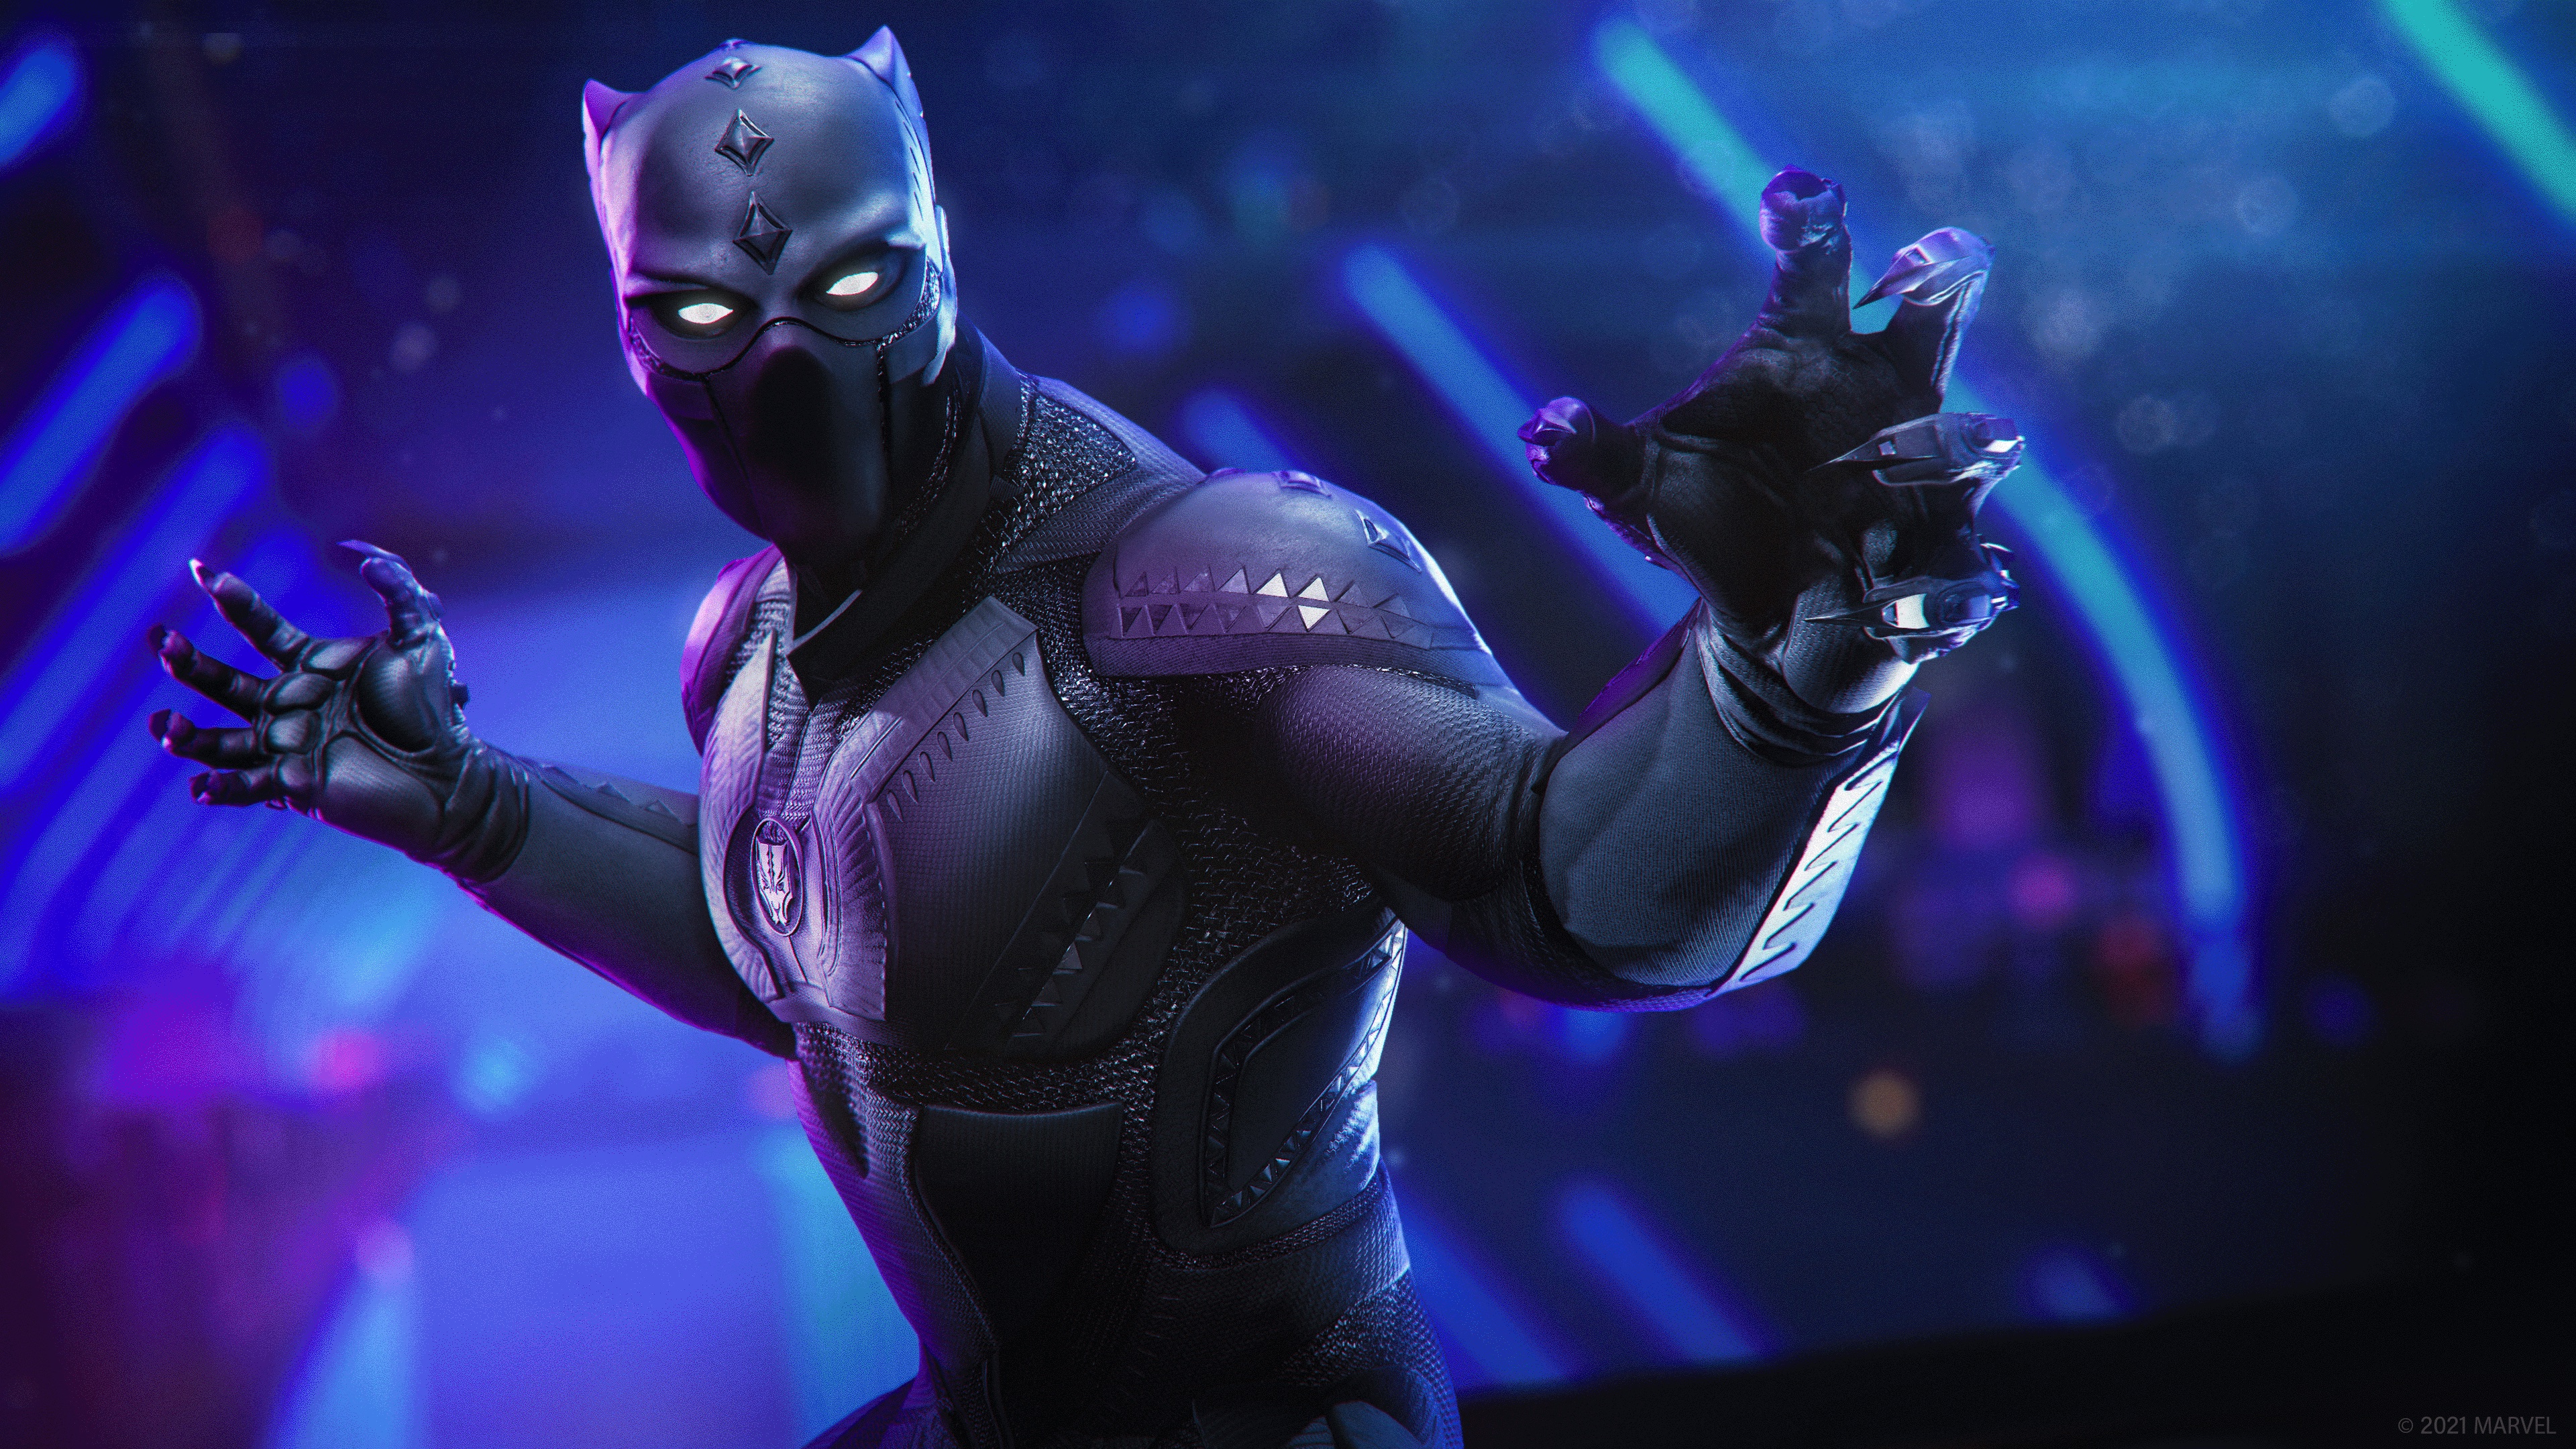 Black Panther video game coming from EA and new studio - Polygon